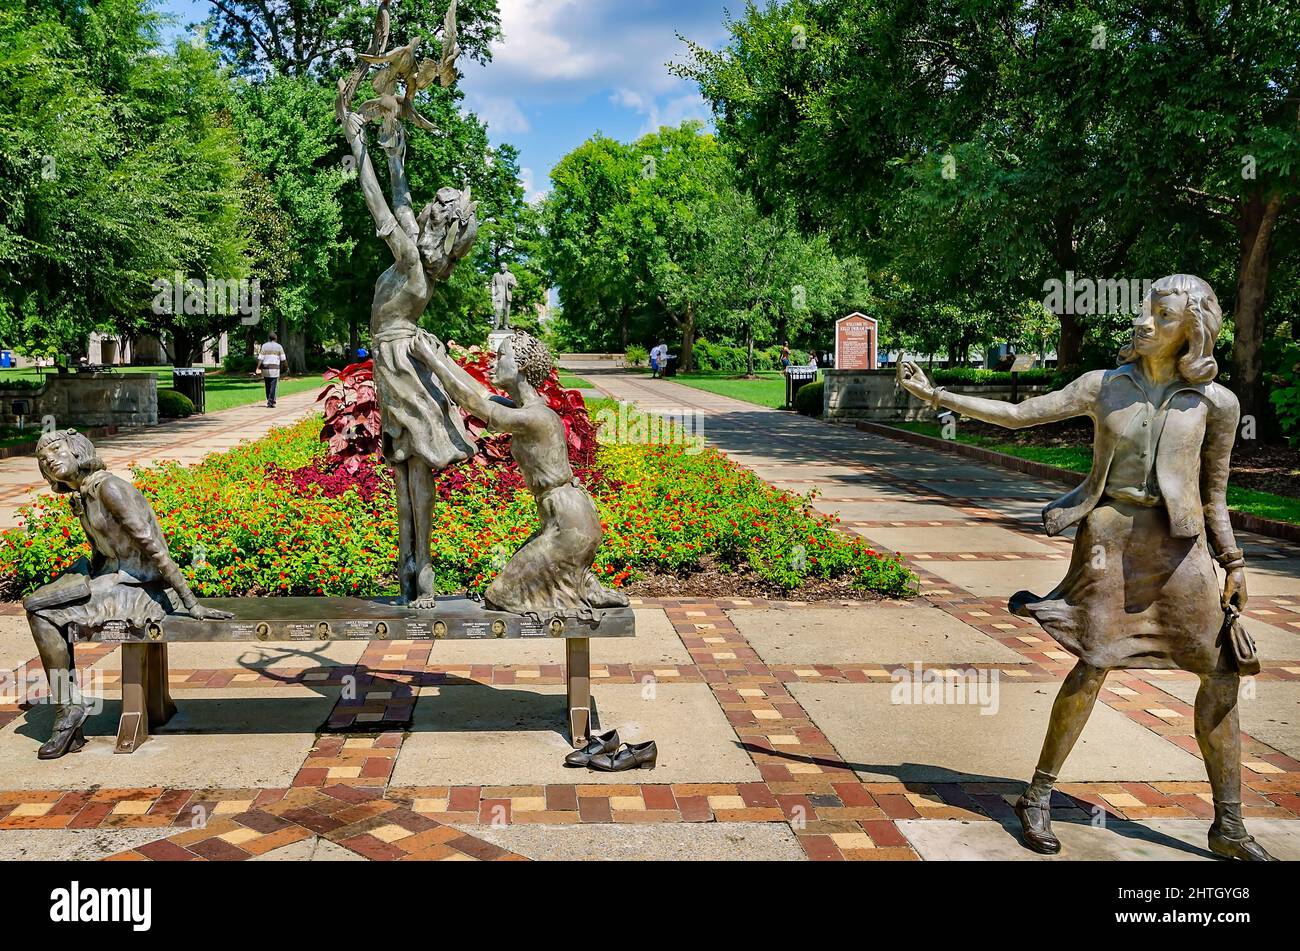 A statue of a girl releasing doves stands at the corner of Kelly Ingram Park, near 16th St. Baptist Church, July 12, 2015, in Birmingham, Alabama. Stock Photo